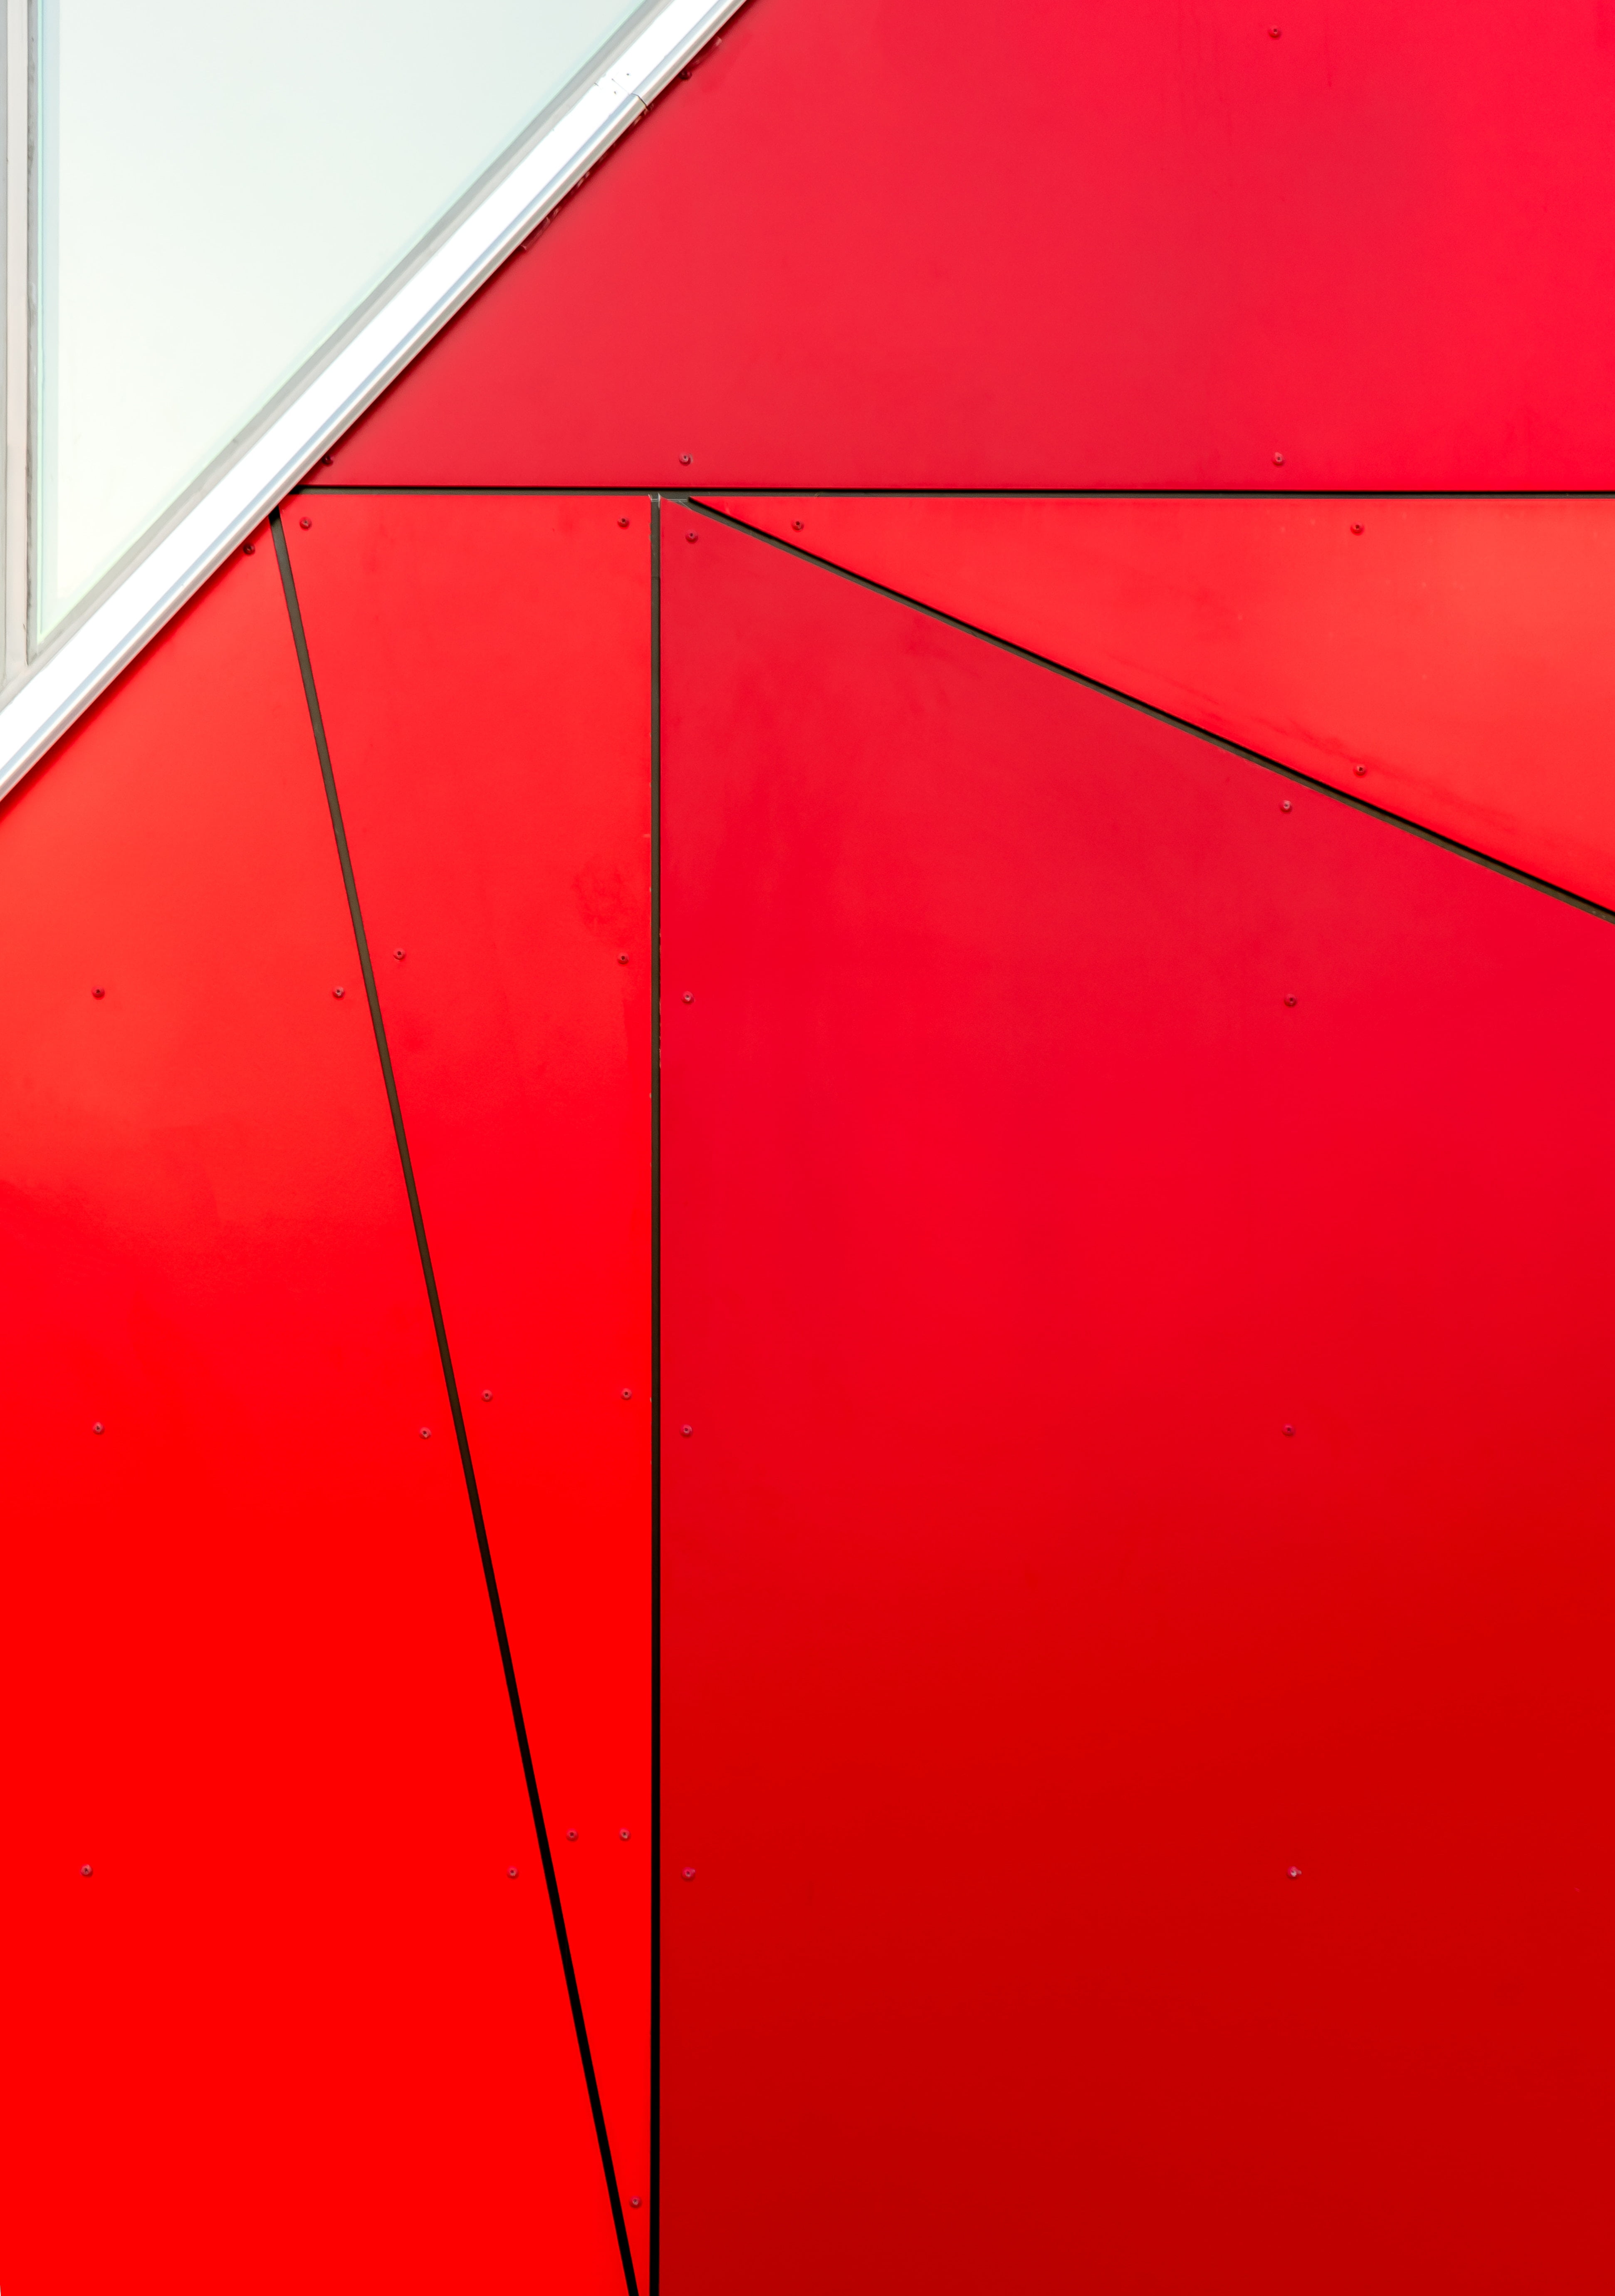 architectural details, linear, minimalism, red, backgrounds